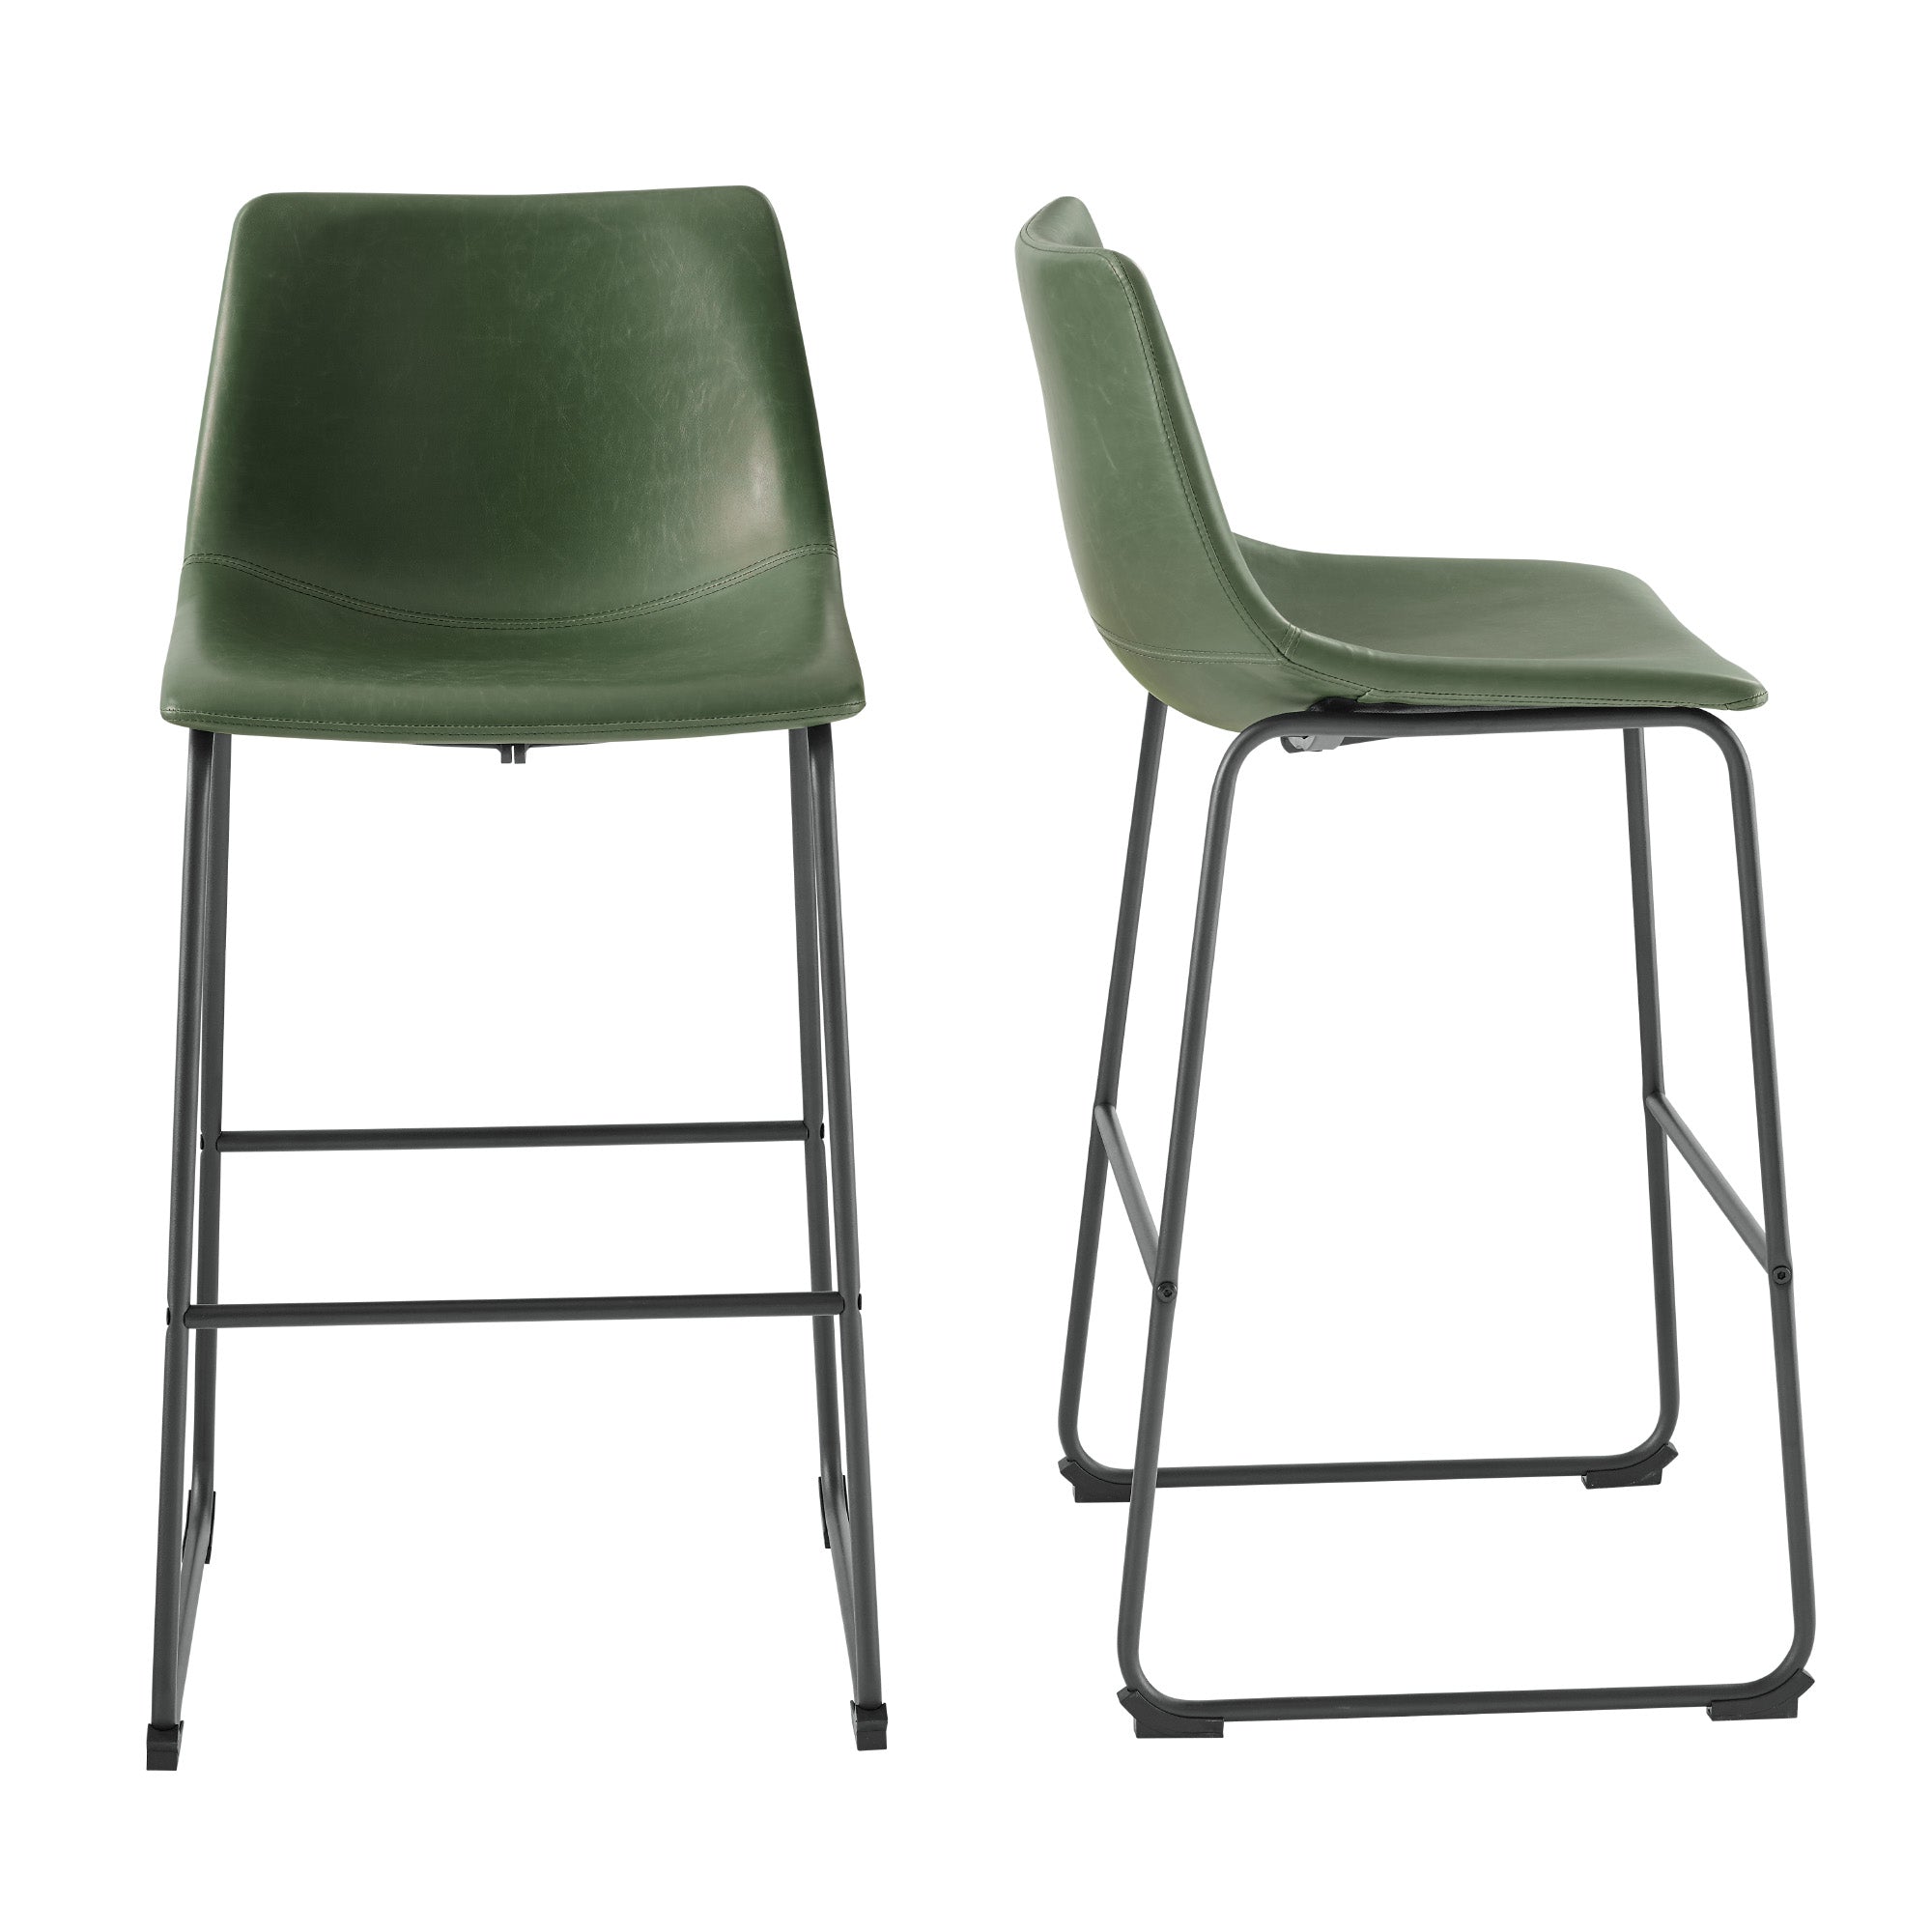 30" Industrial Faux Leather Barstools Set of 2 - East Shore Modern Home Furnishings